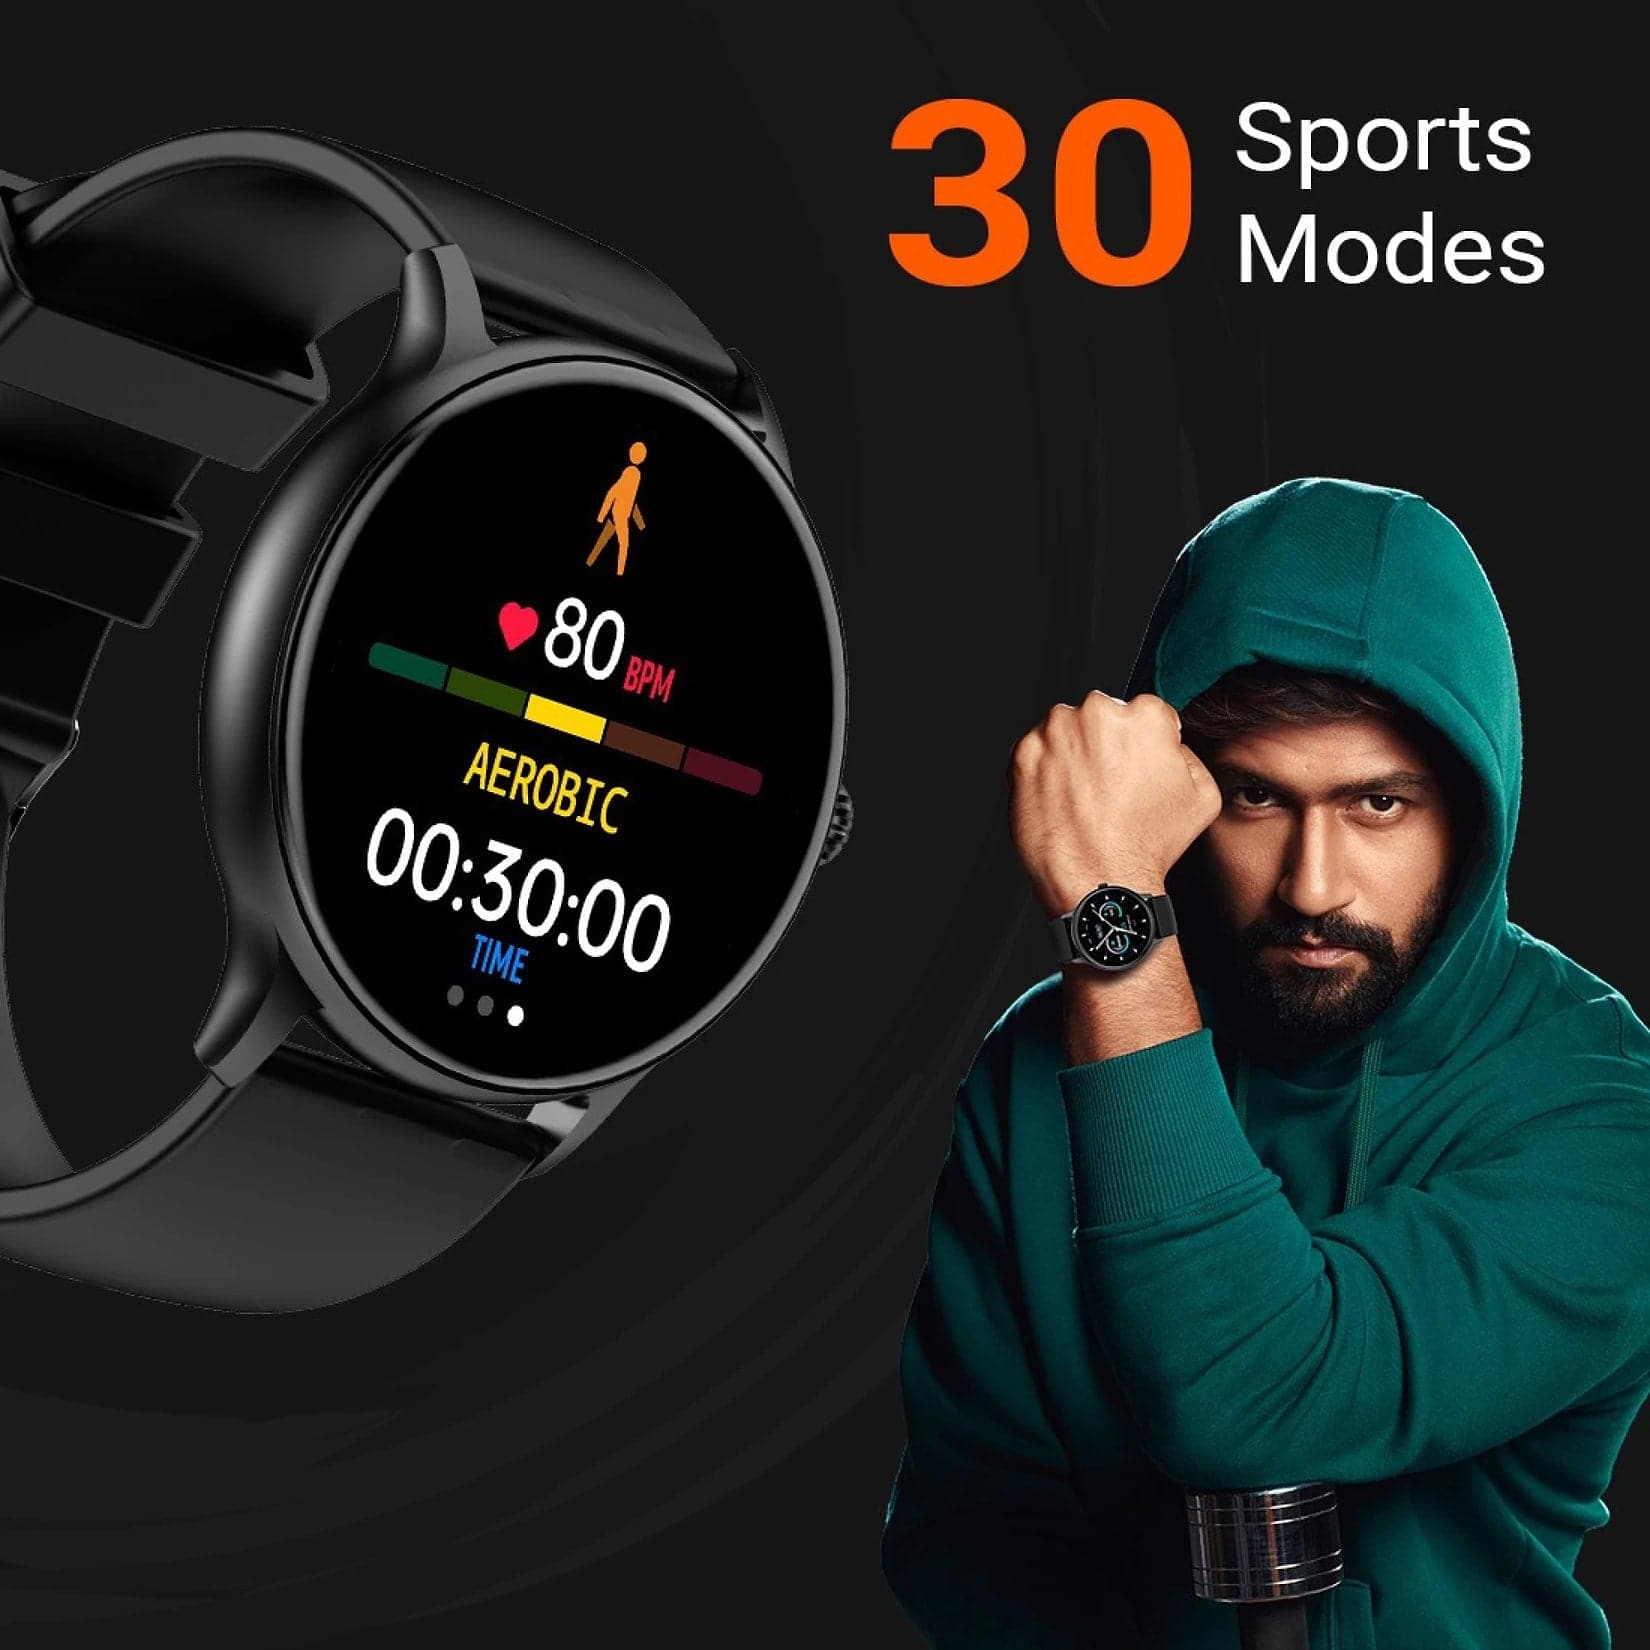 Fire-Boltt Dream 'Wristphone' With 4G LTE Connectivity, IP67 Rating  Launched in India: Price, Specifications | Technology News